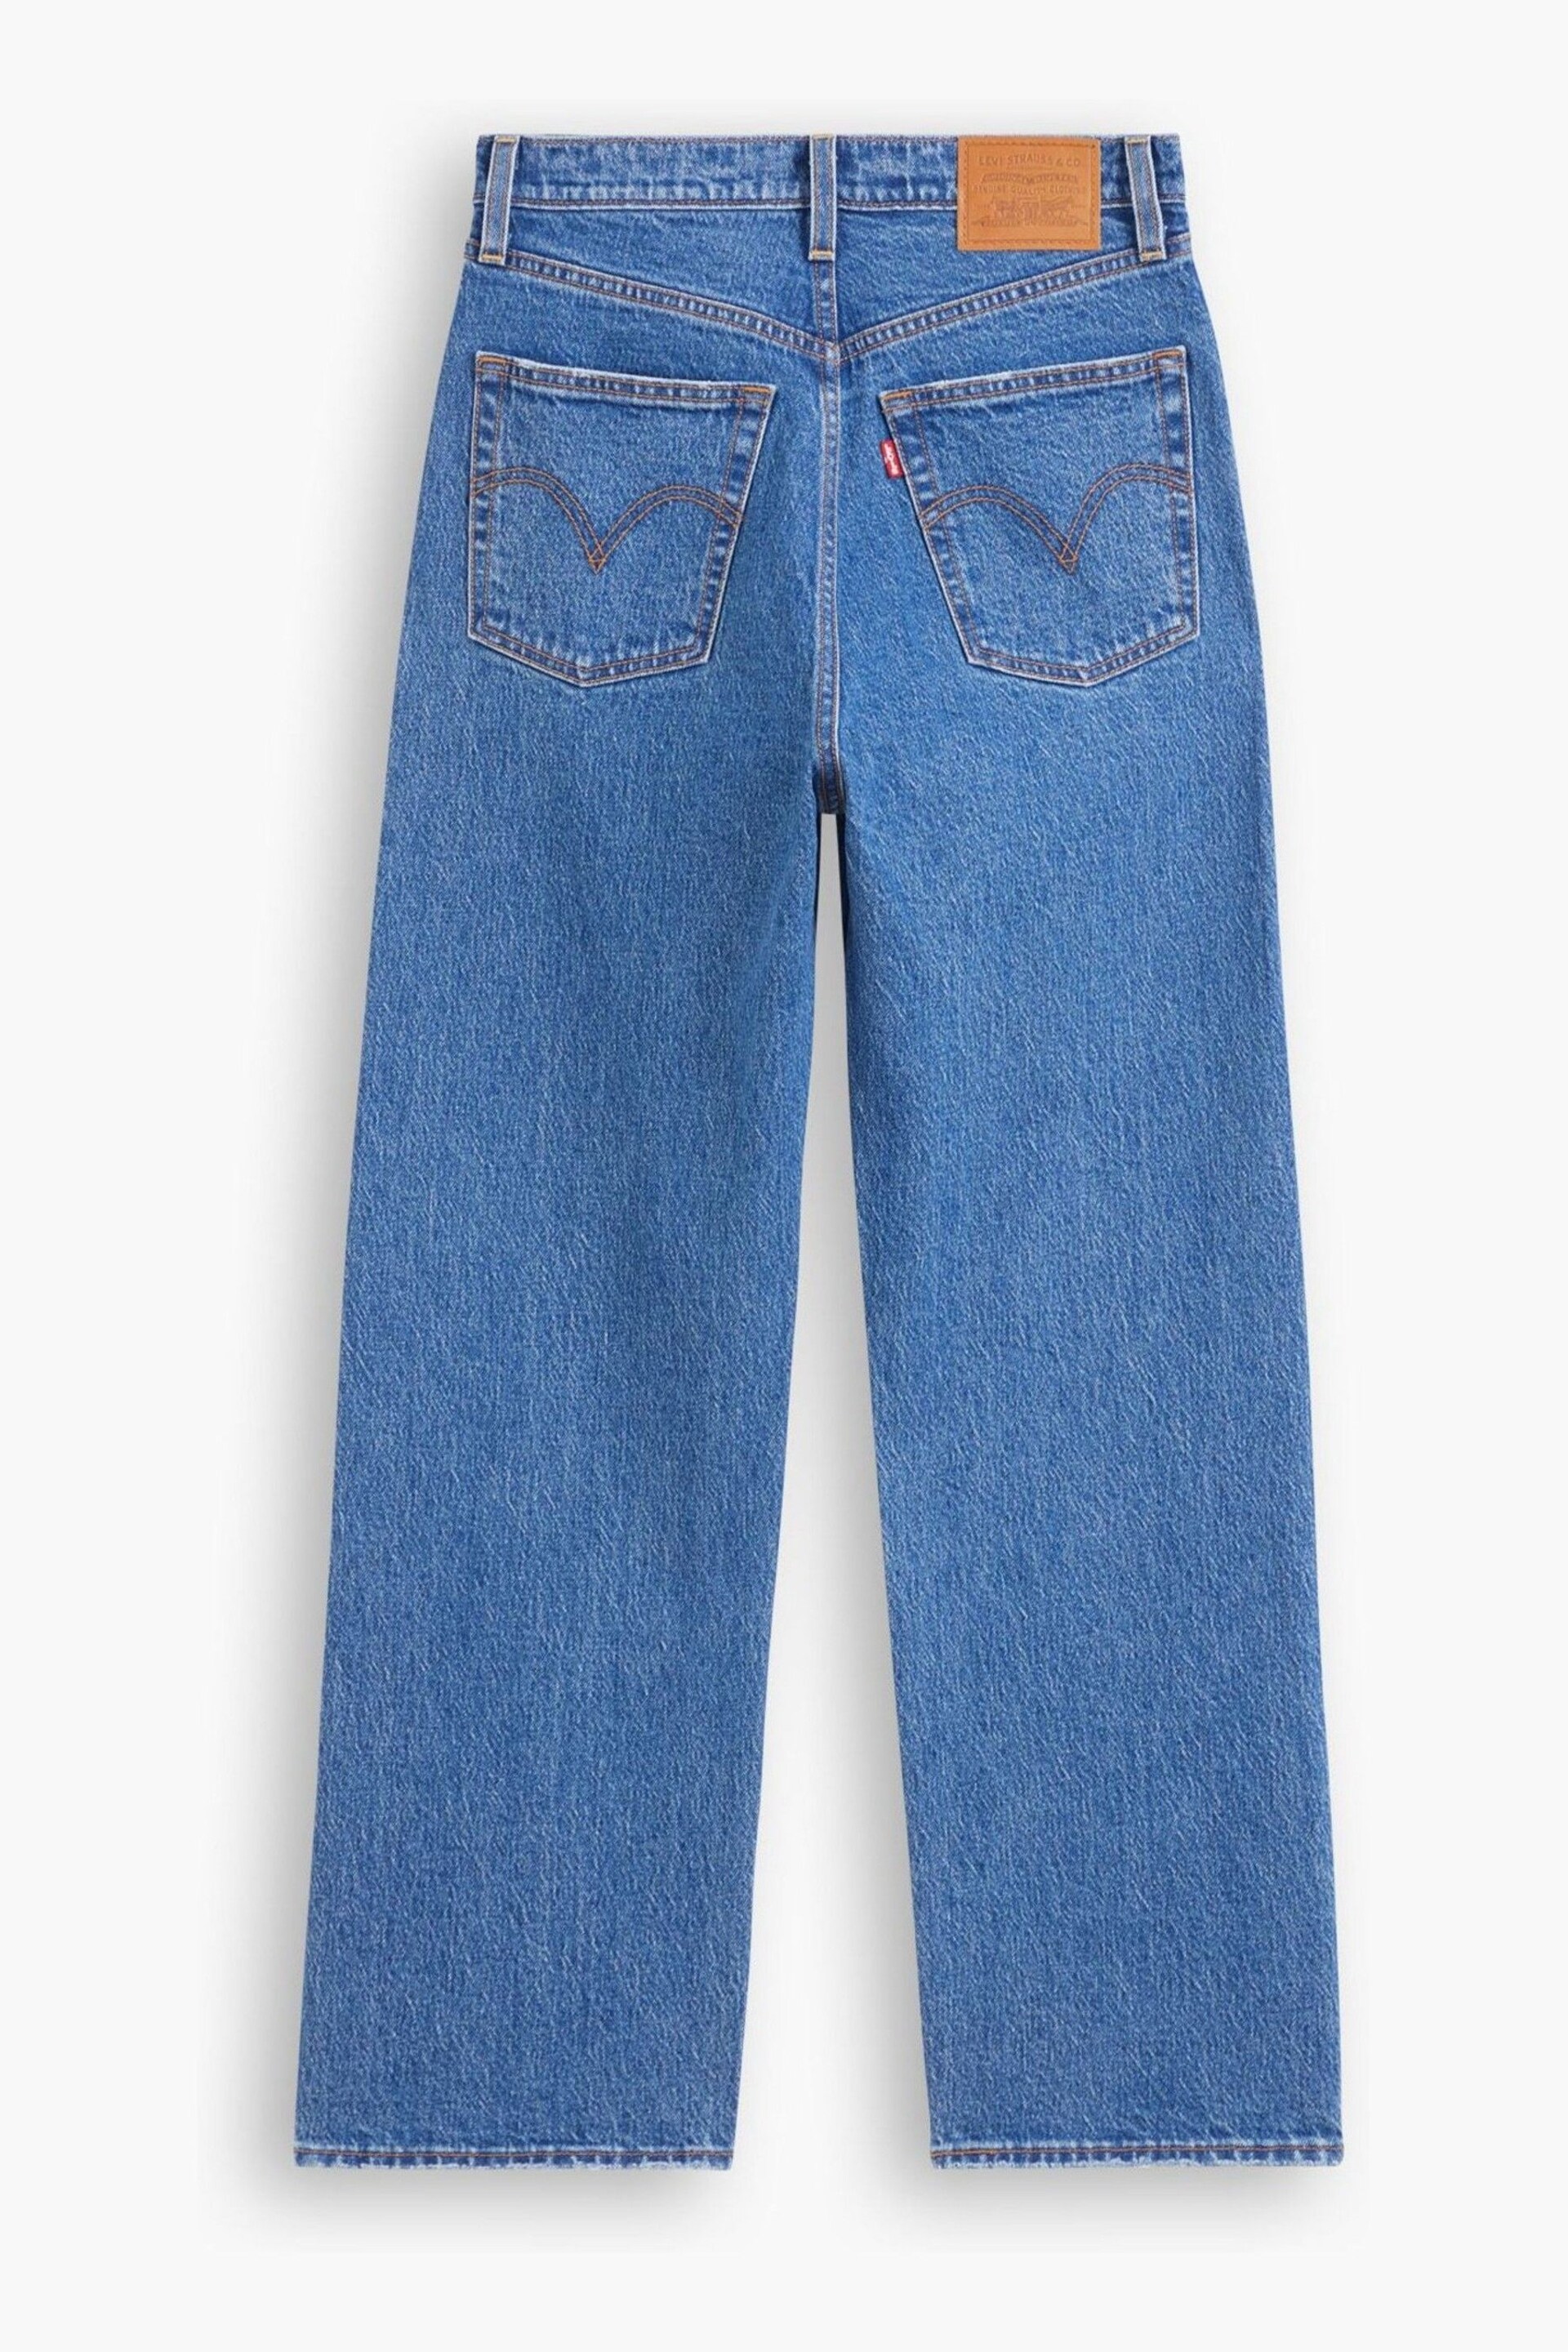 Levi's® Jazz Pop Ribcage Straight Ankle Jeans - Image 11 of 14